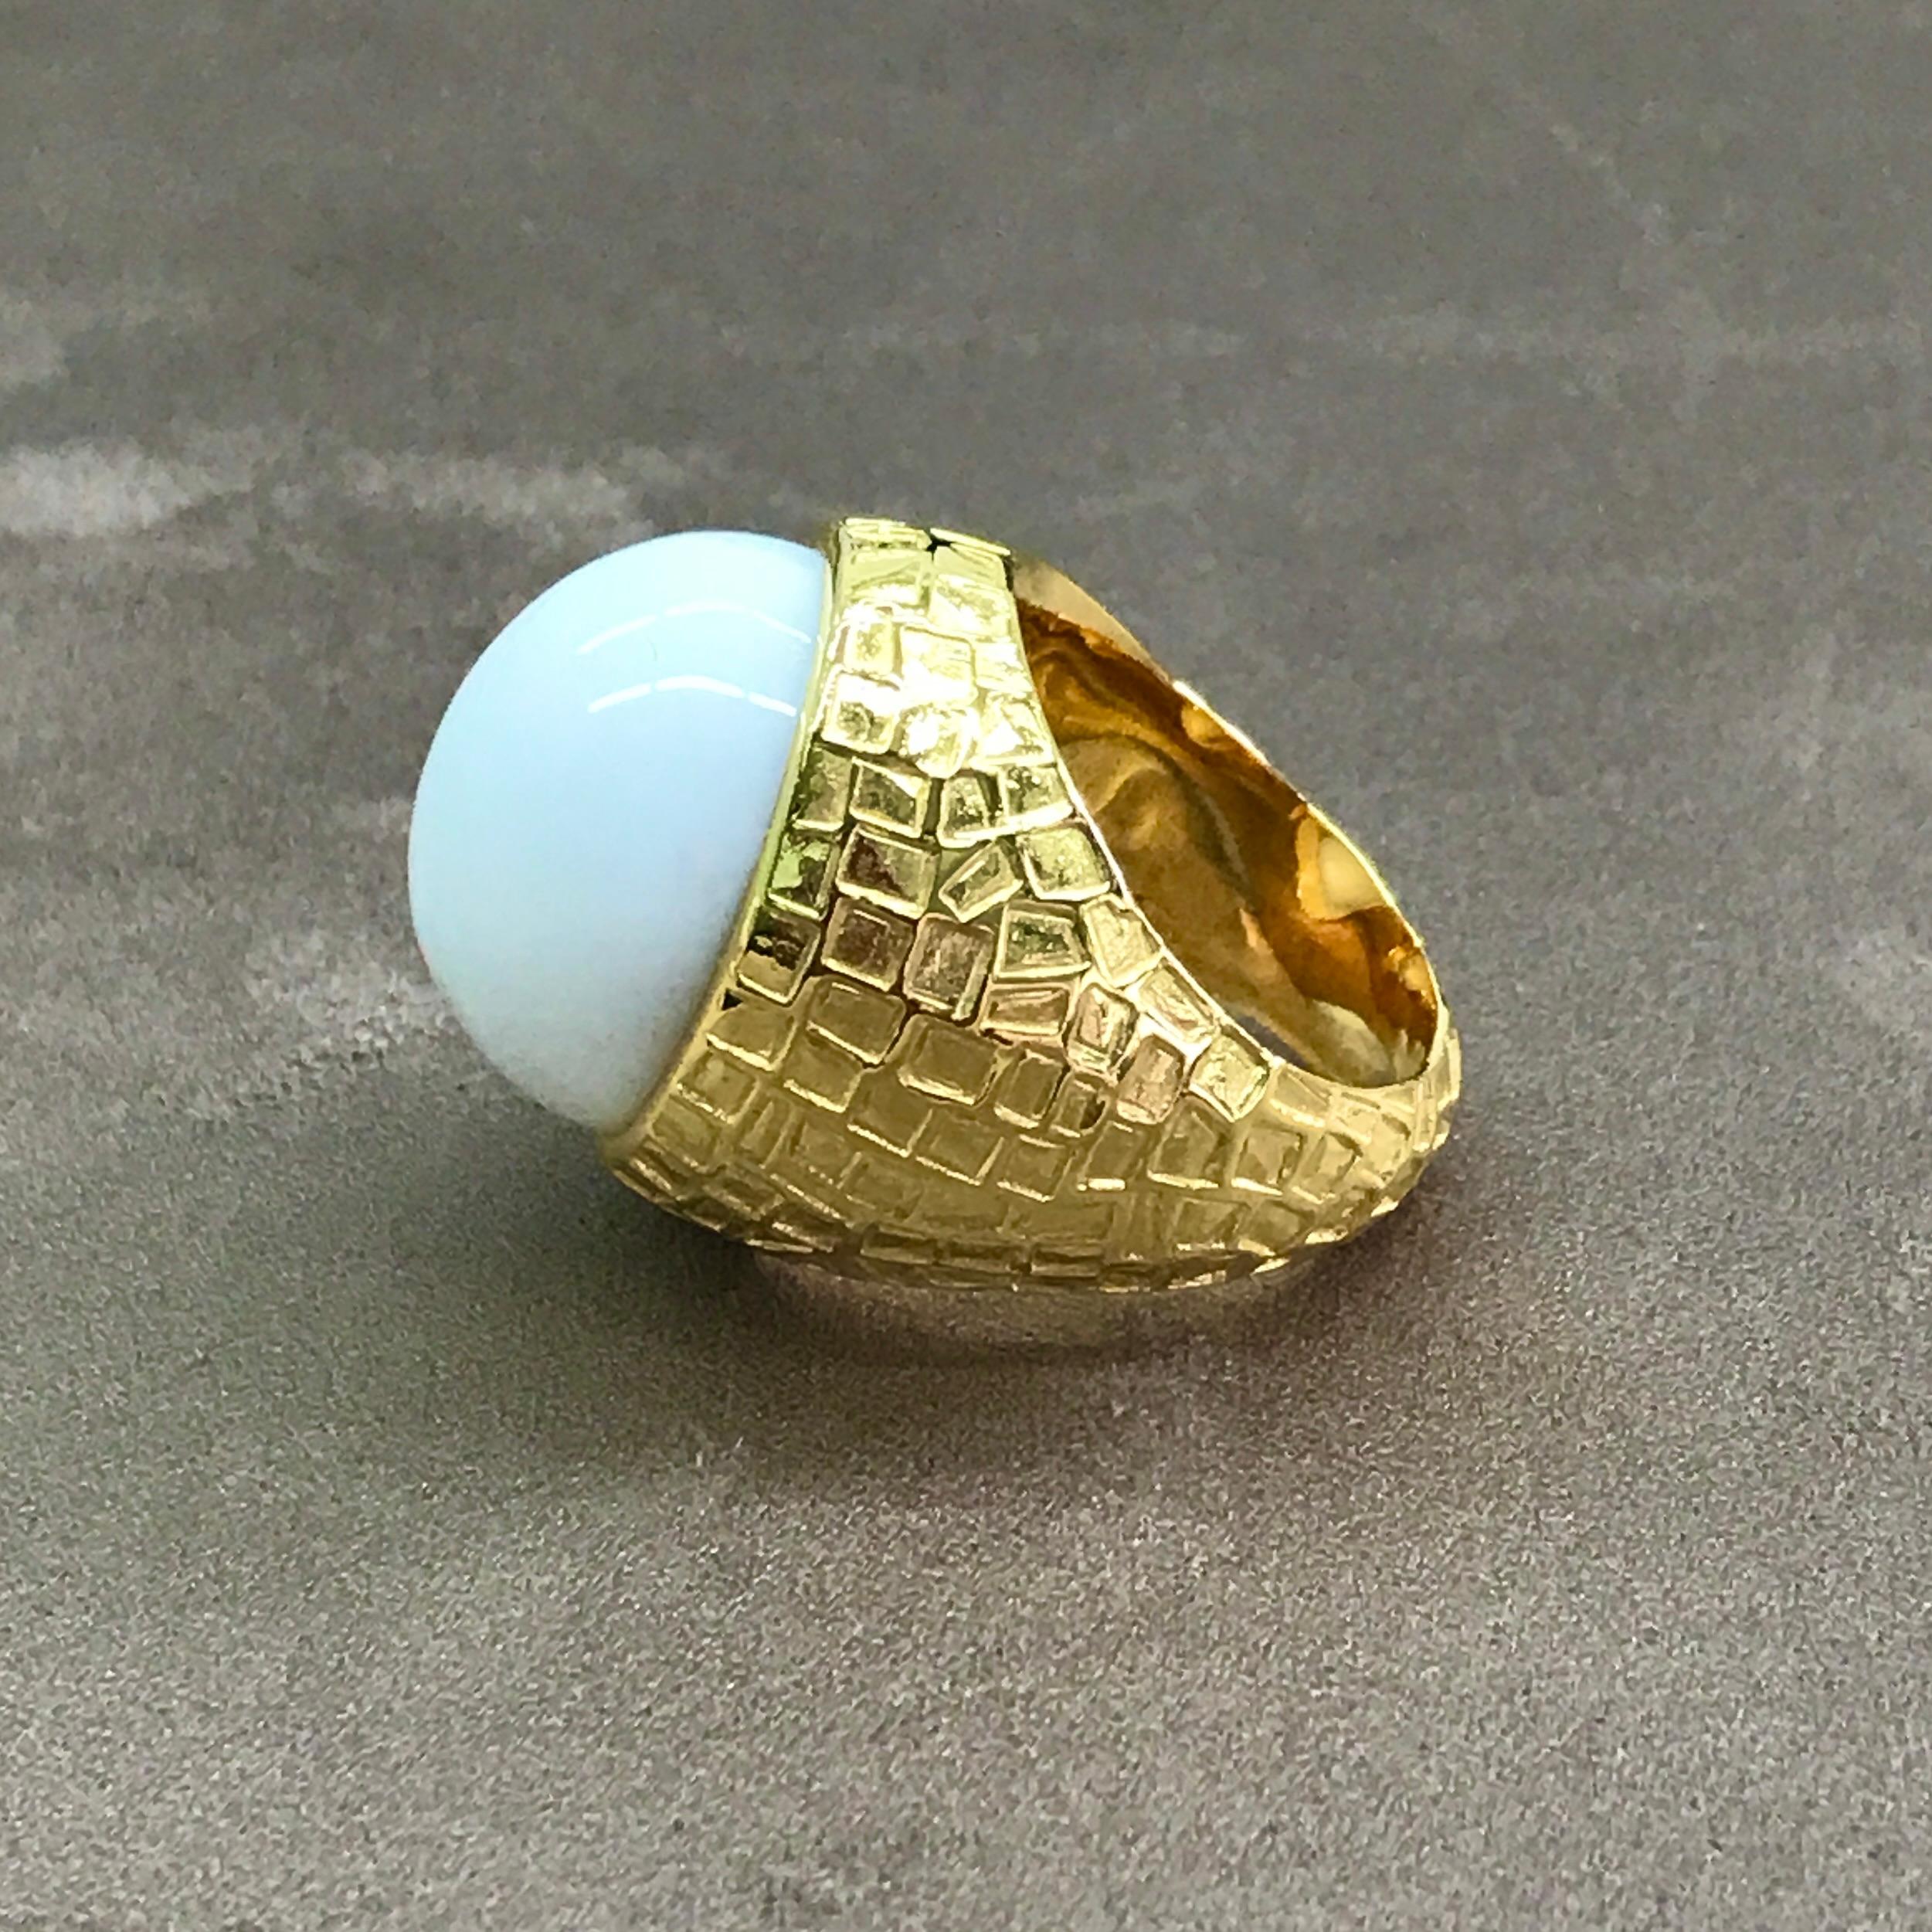 Set with a lustrous oval cabochon White Onyx within a 'chiselled' mount, this is a wonderfully simple yet striking ring - it would look great worn day or night and would not look out of place at any occasion. 

The stone measures 20mm x 18mm
The